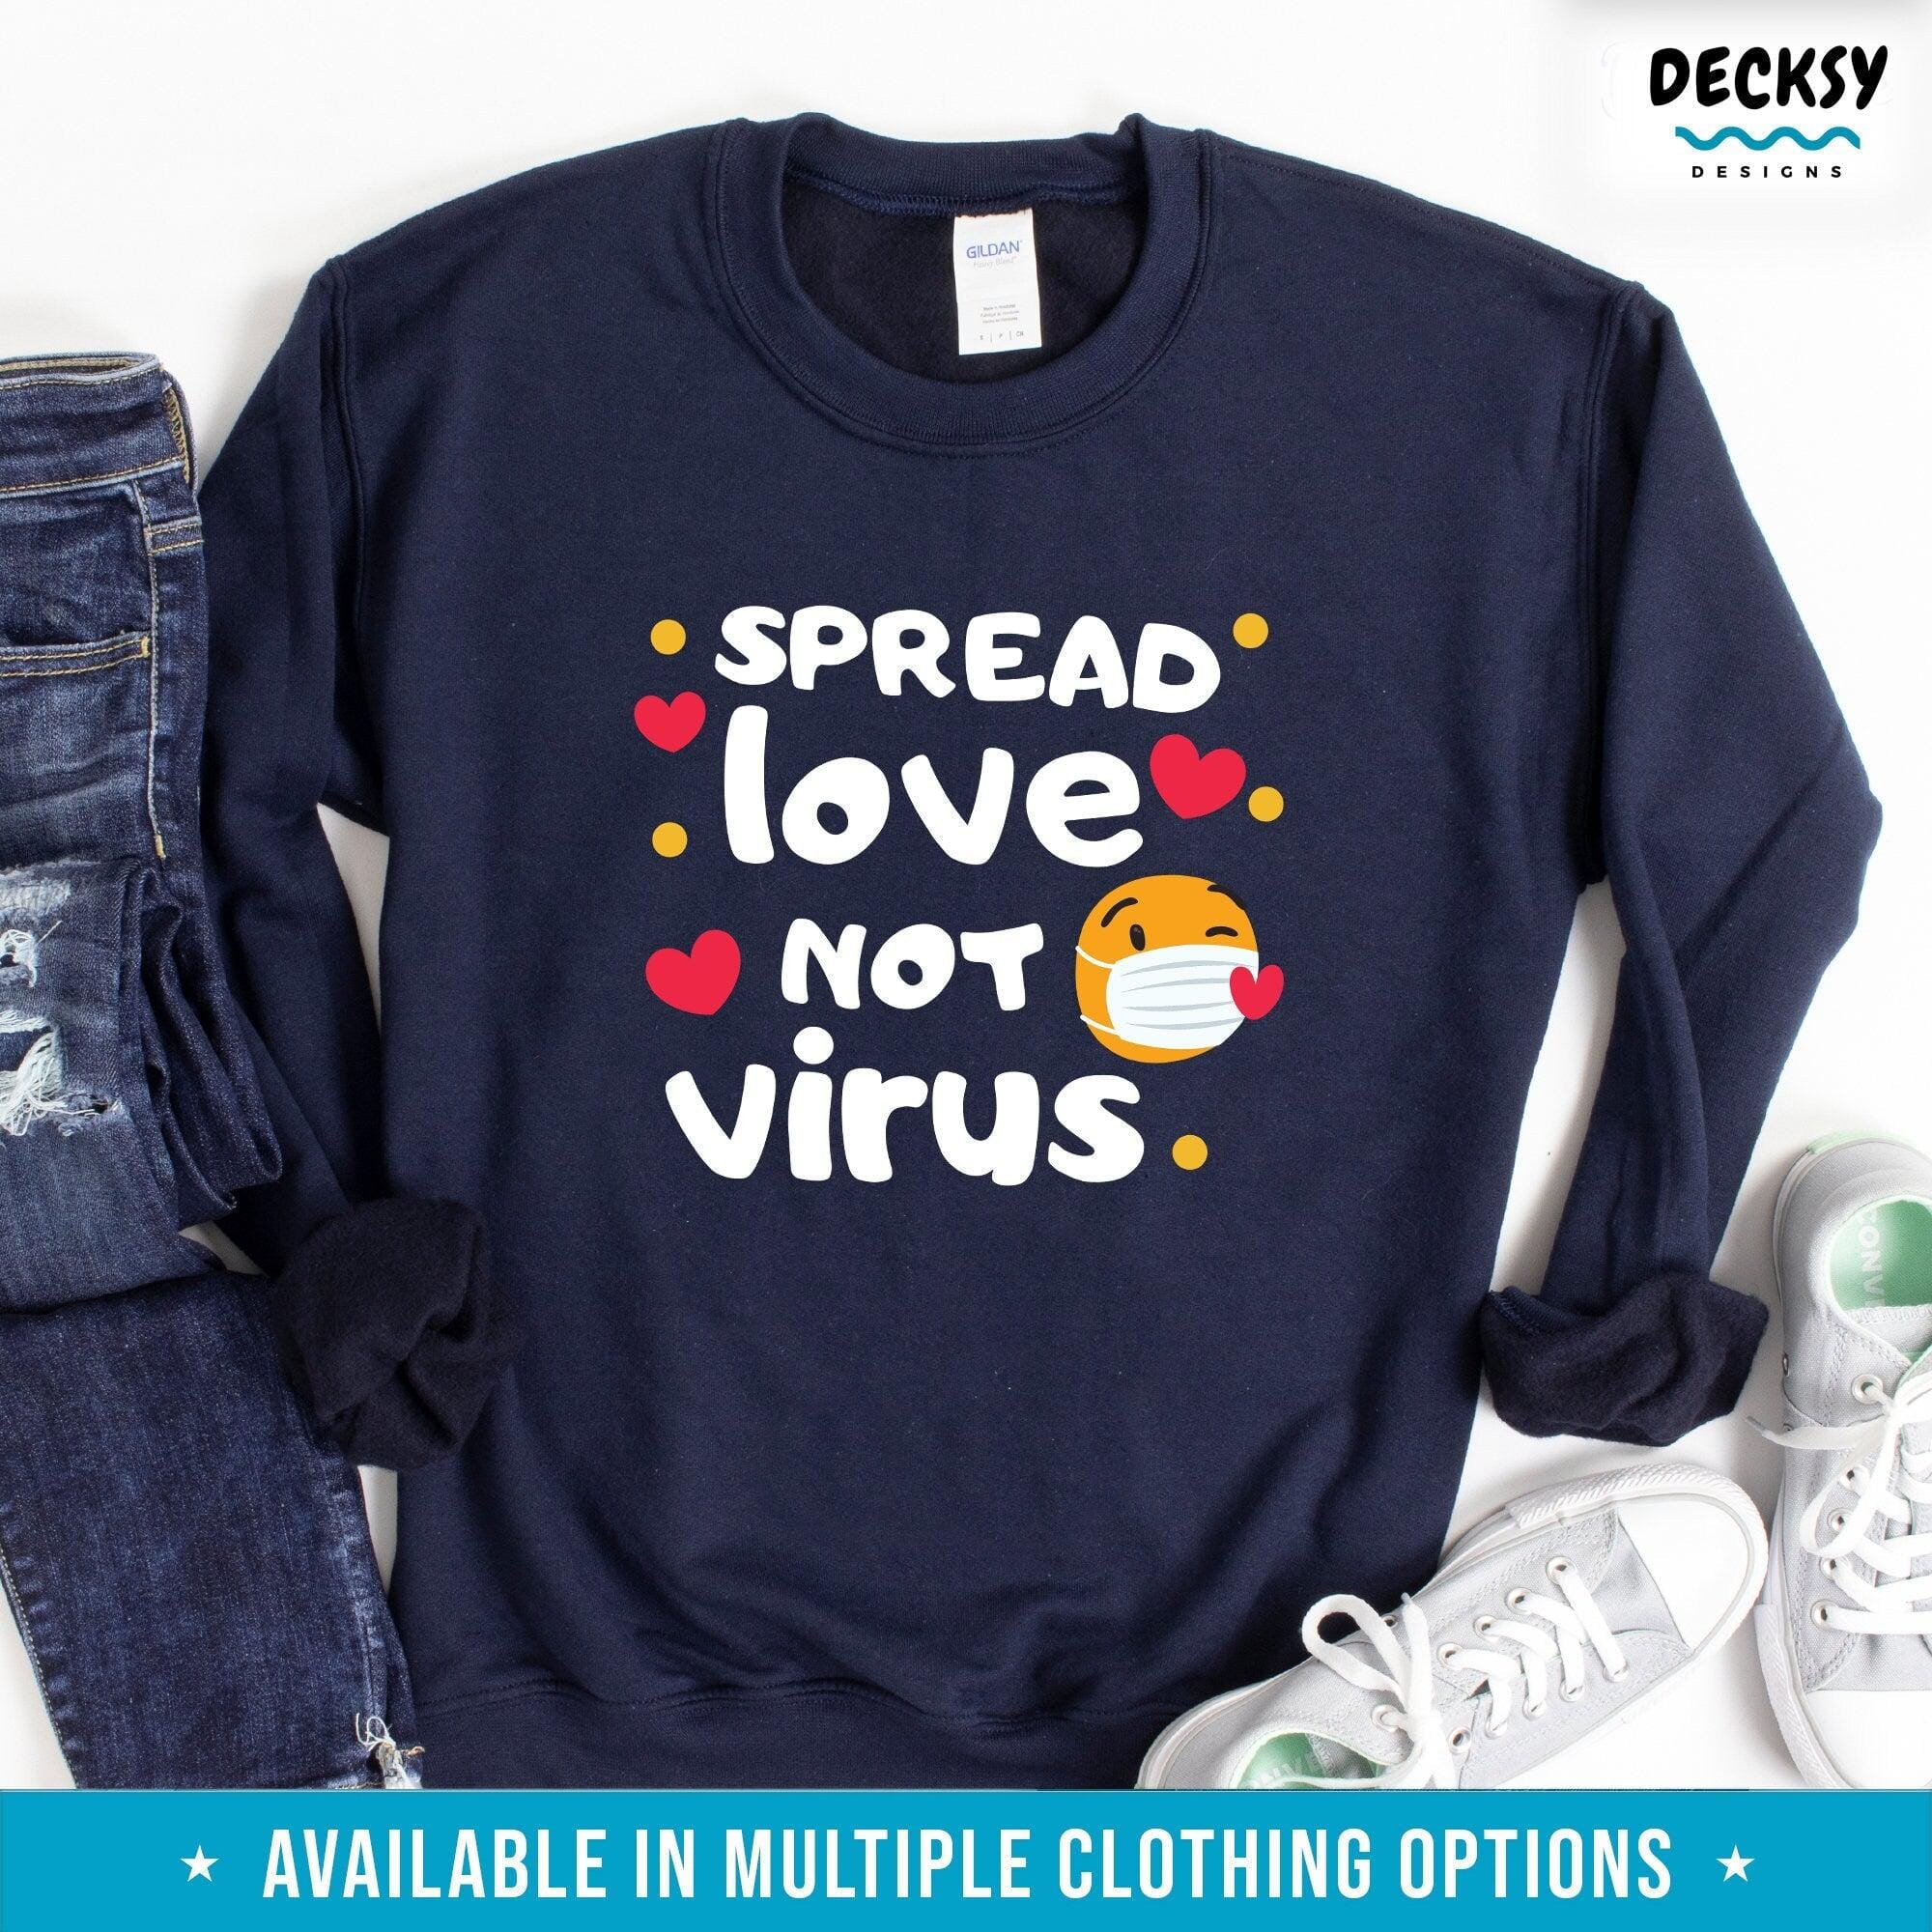 Spread Love Not Virus Shirt, Funny Valentine Gift-Clothing:Gender-Neutral Adult Clothing:Tops & Tees:T-shirts:Graphic Tees-DecksyDesigns